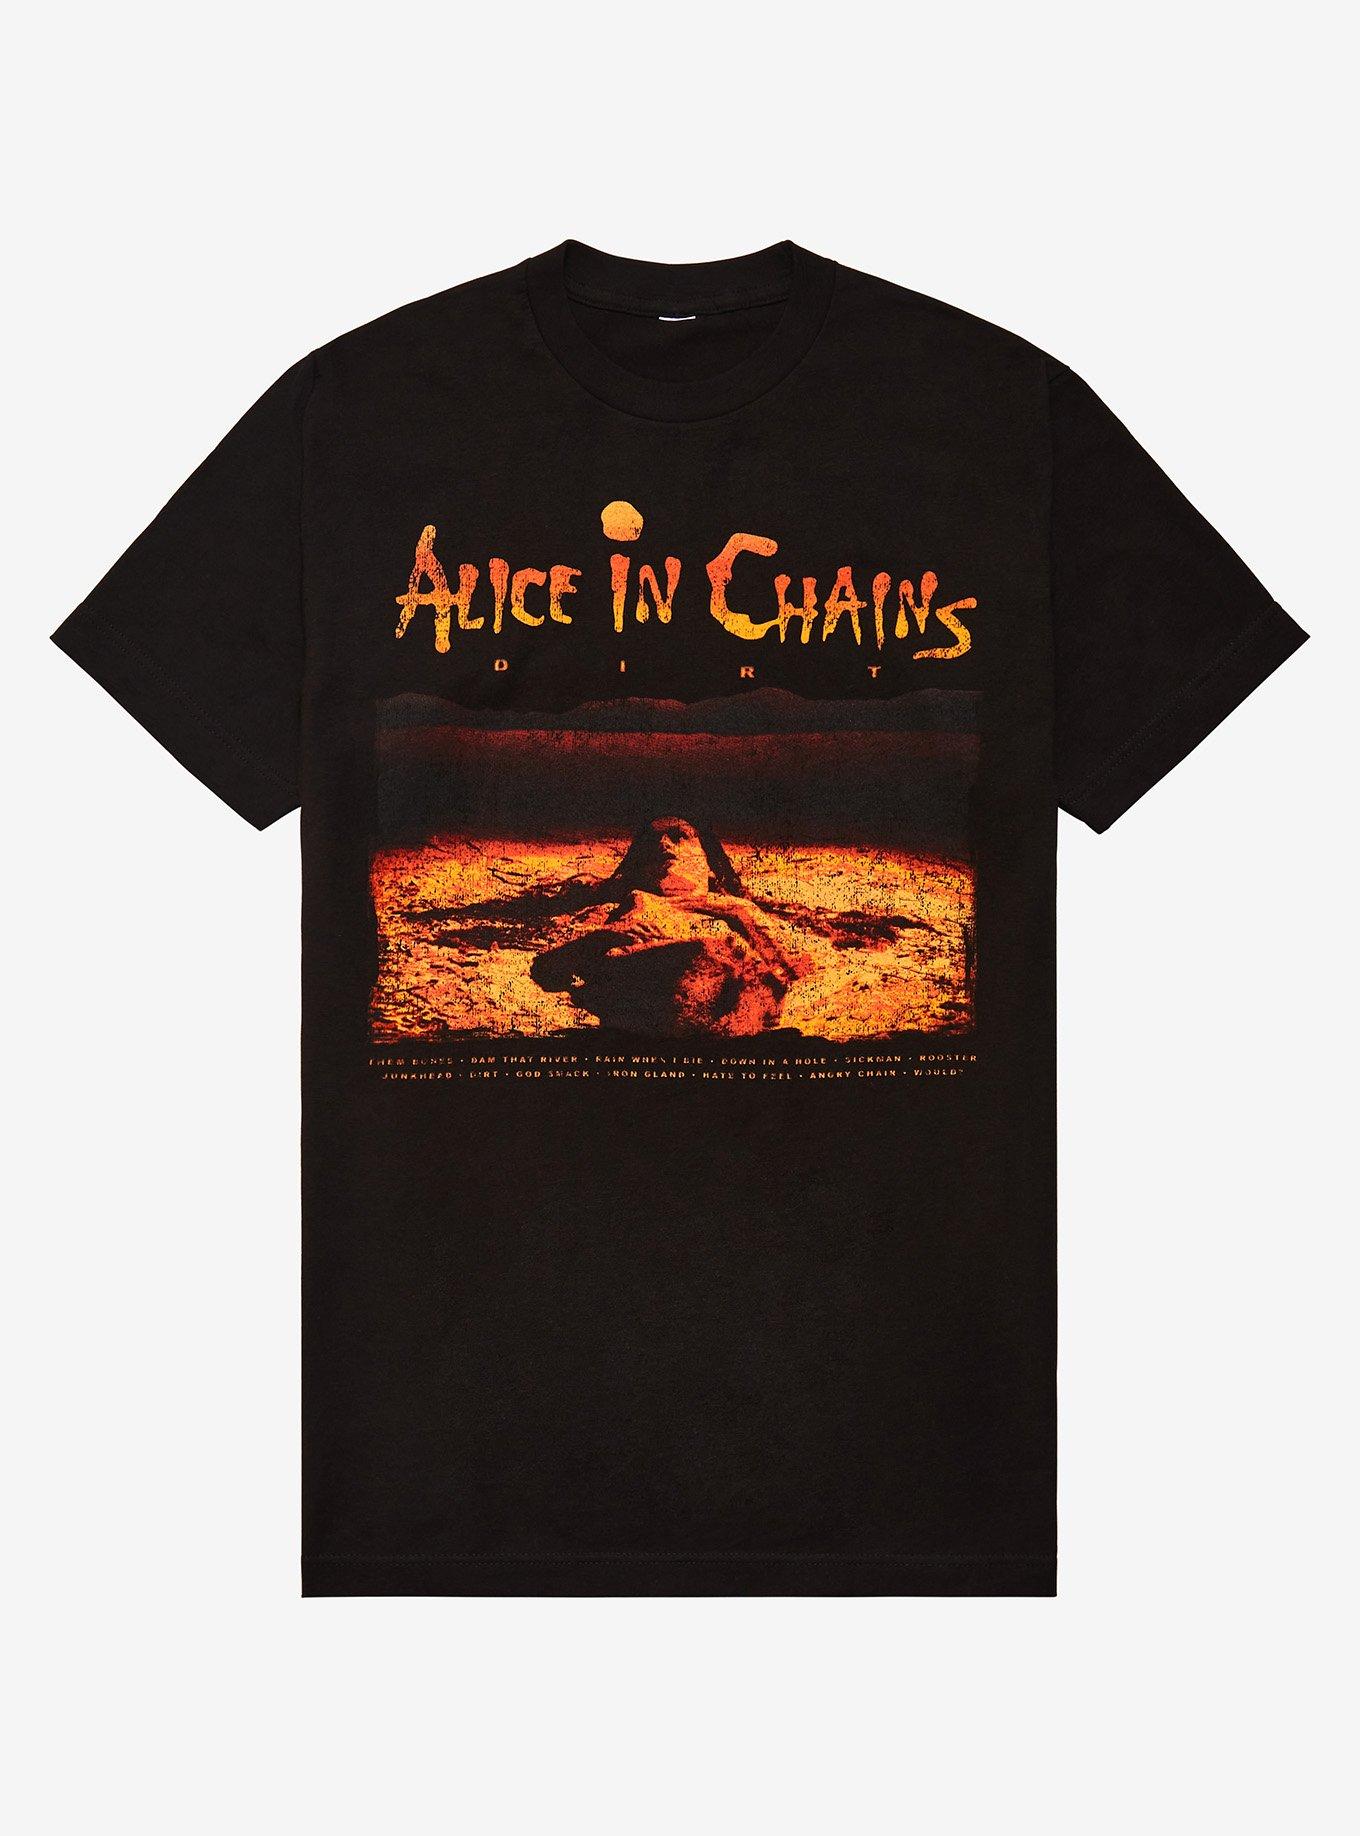 Alice in Chains - Dirt